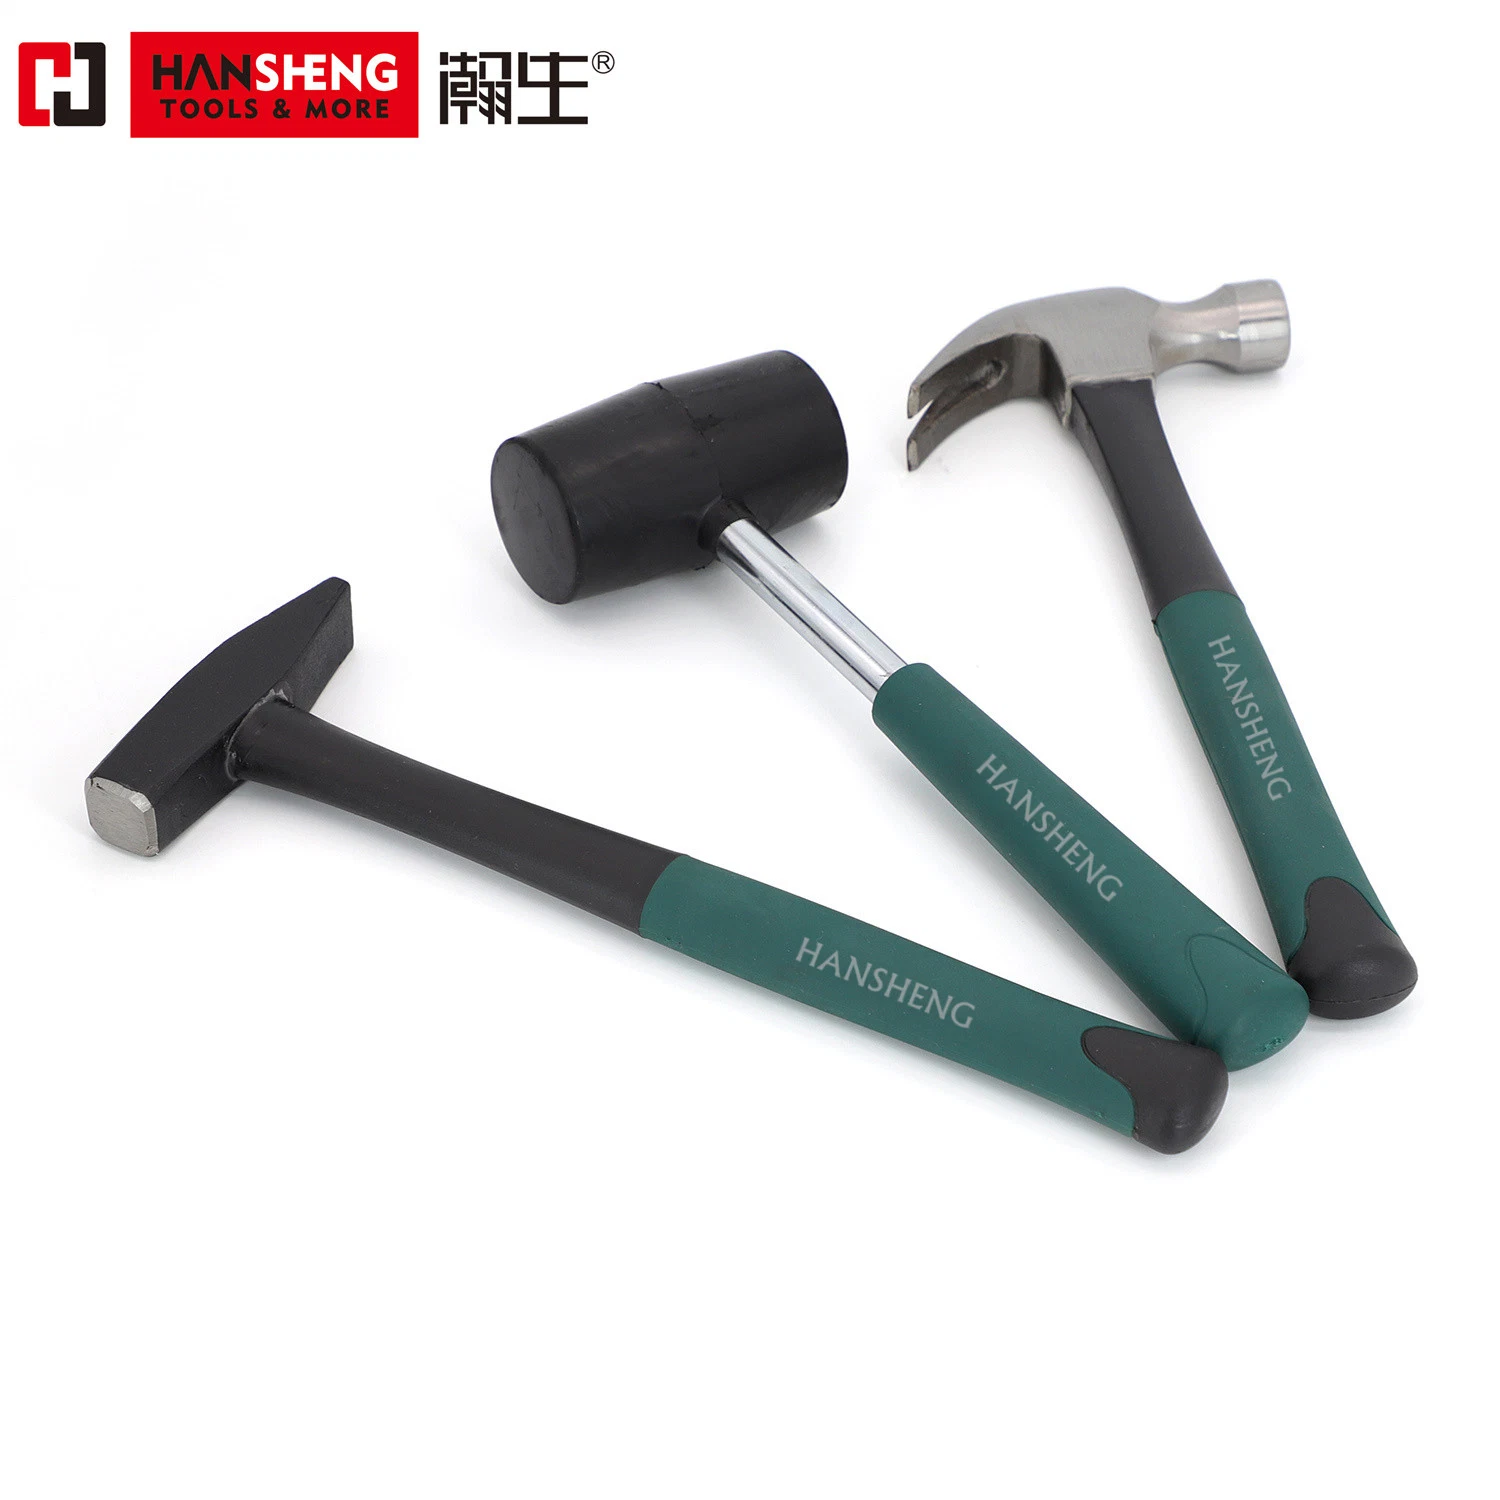 Professional Hand Tool, Hardware Tools, Made of Carbon Steel, PVC Handle, Machinist Hammer, Rubber Hammer, Claw Hammer, Bricklaye Hammers